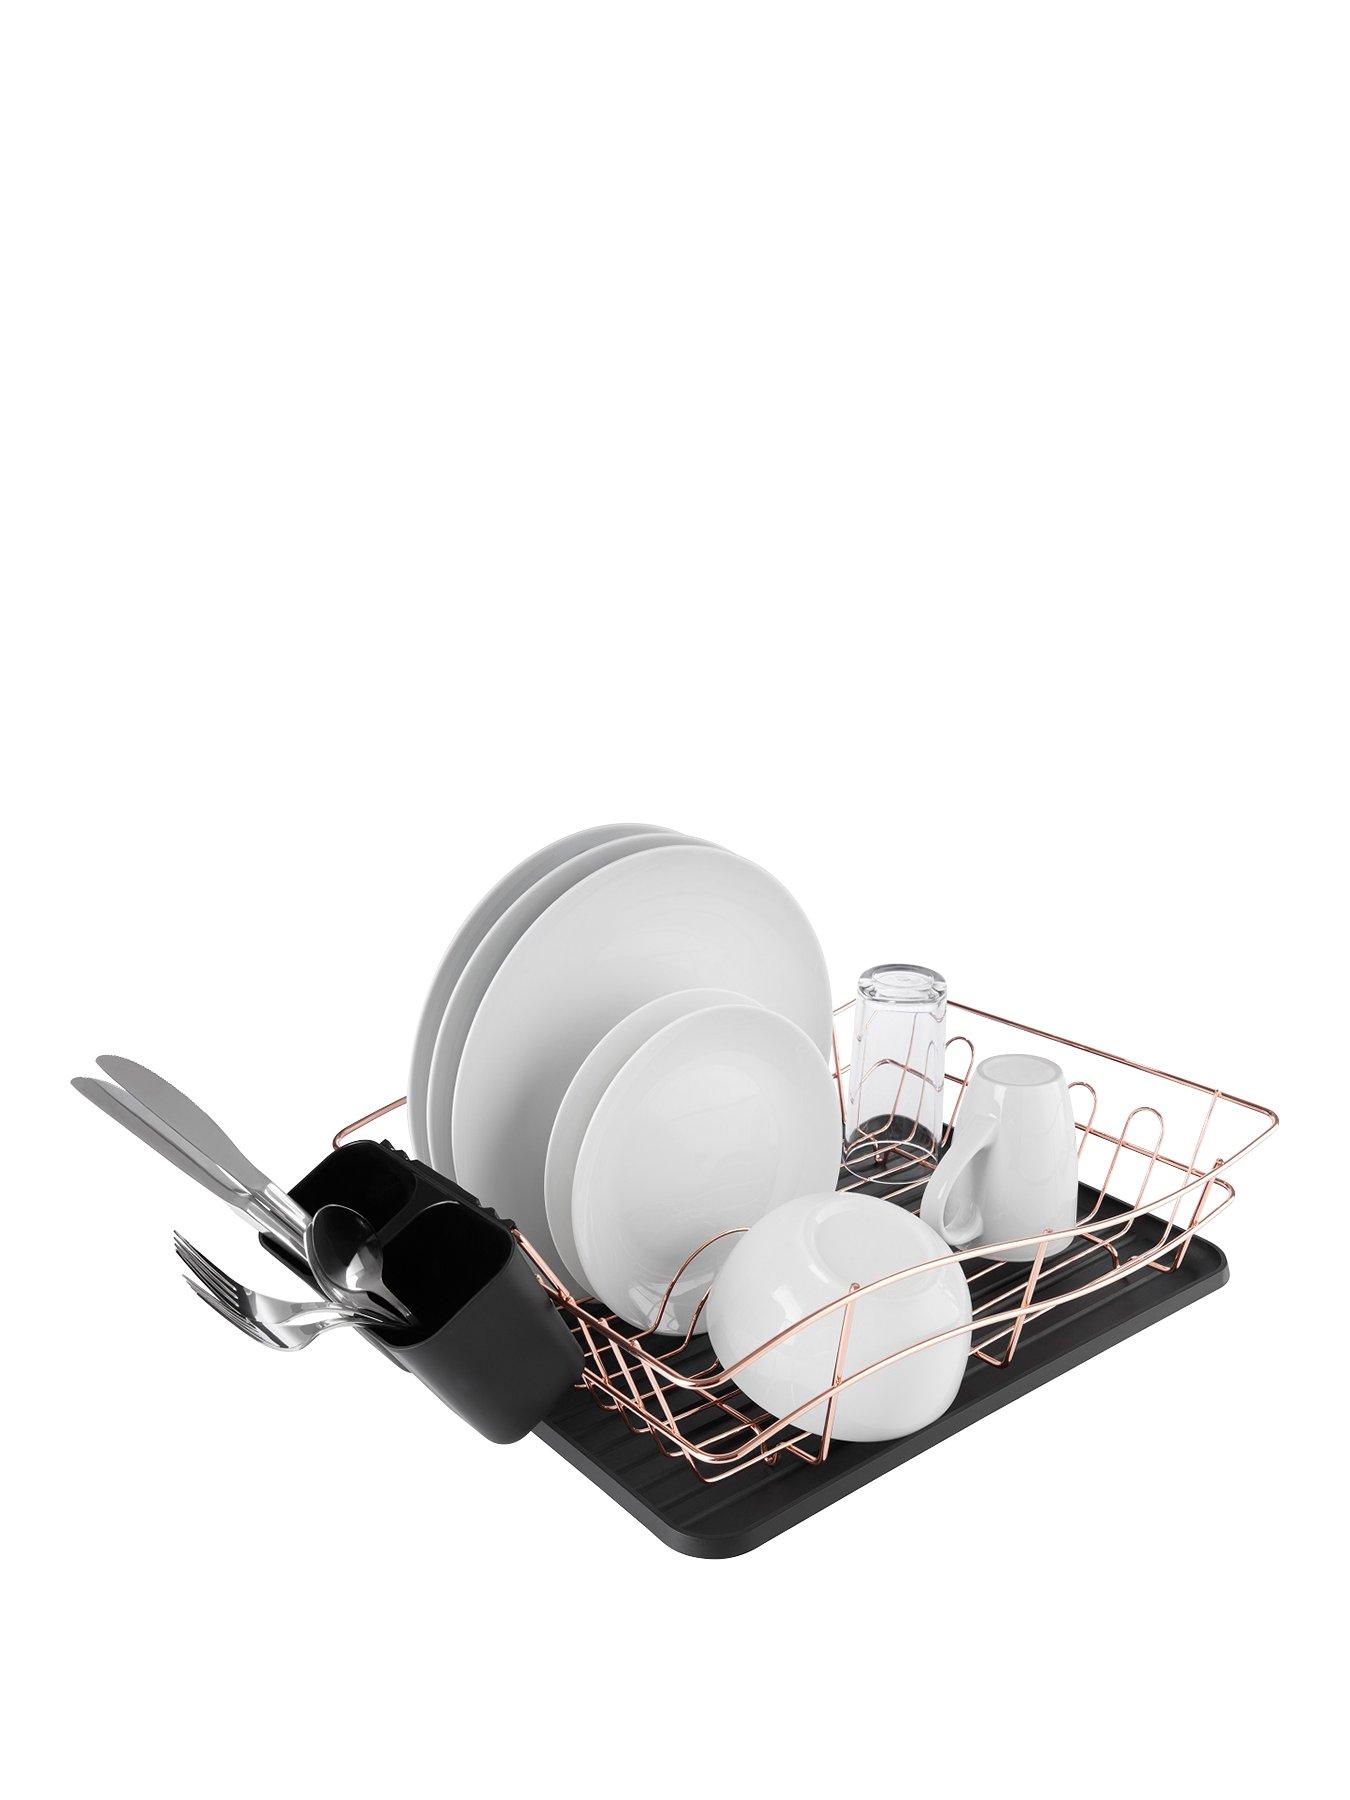 https://media.very.co.uk/i/very/NAGND_SQ1_0000000088_NO_COLOR_SLf/tower-dish-rack-with-rose-gold-tray.jpg?$180x240_retinamobilex2$